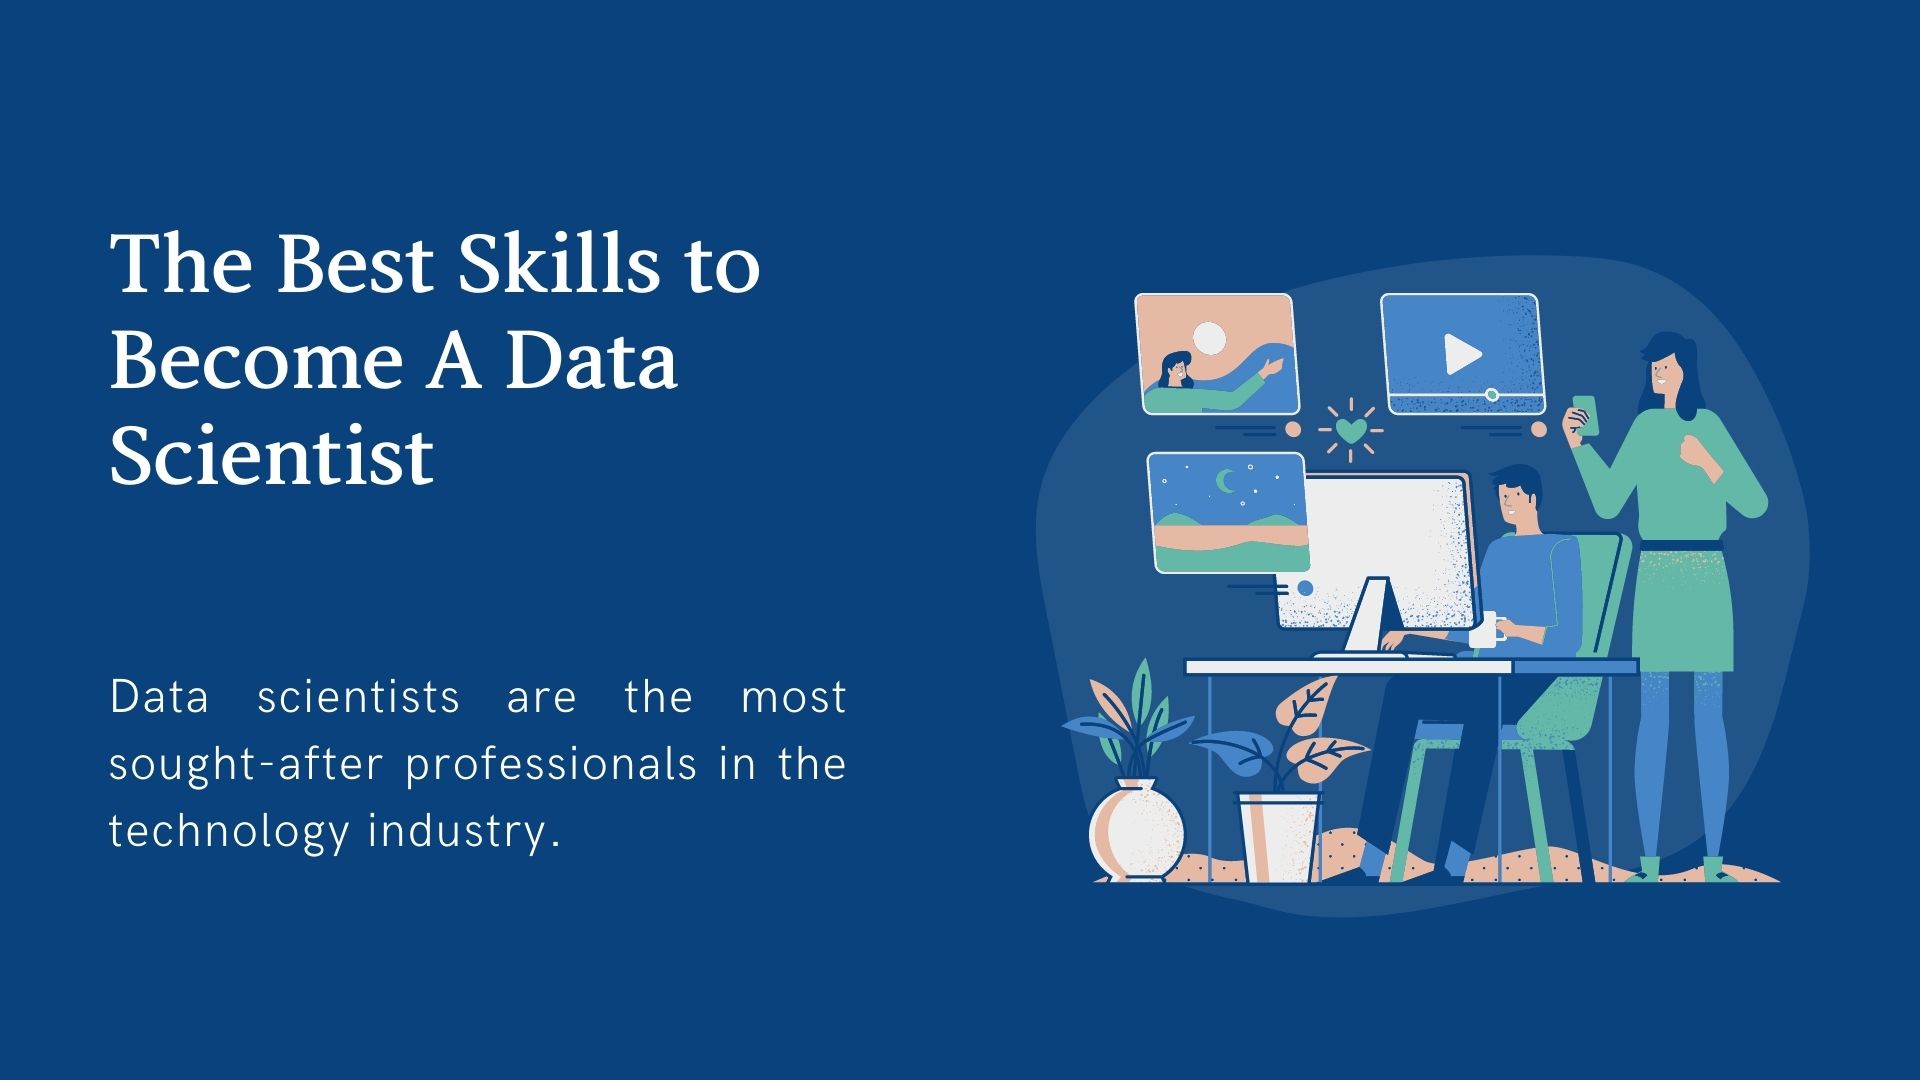 The Best Skills to Become a Data Scientist